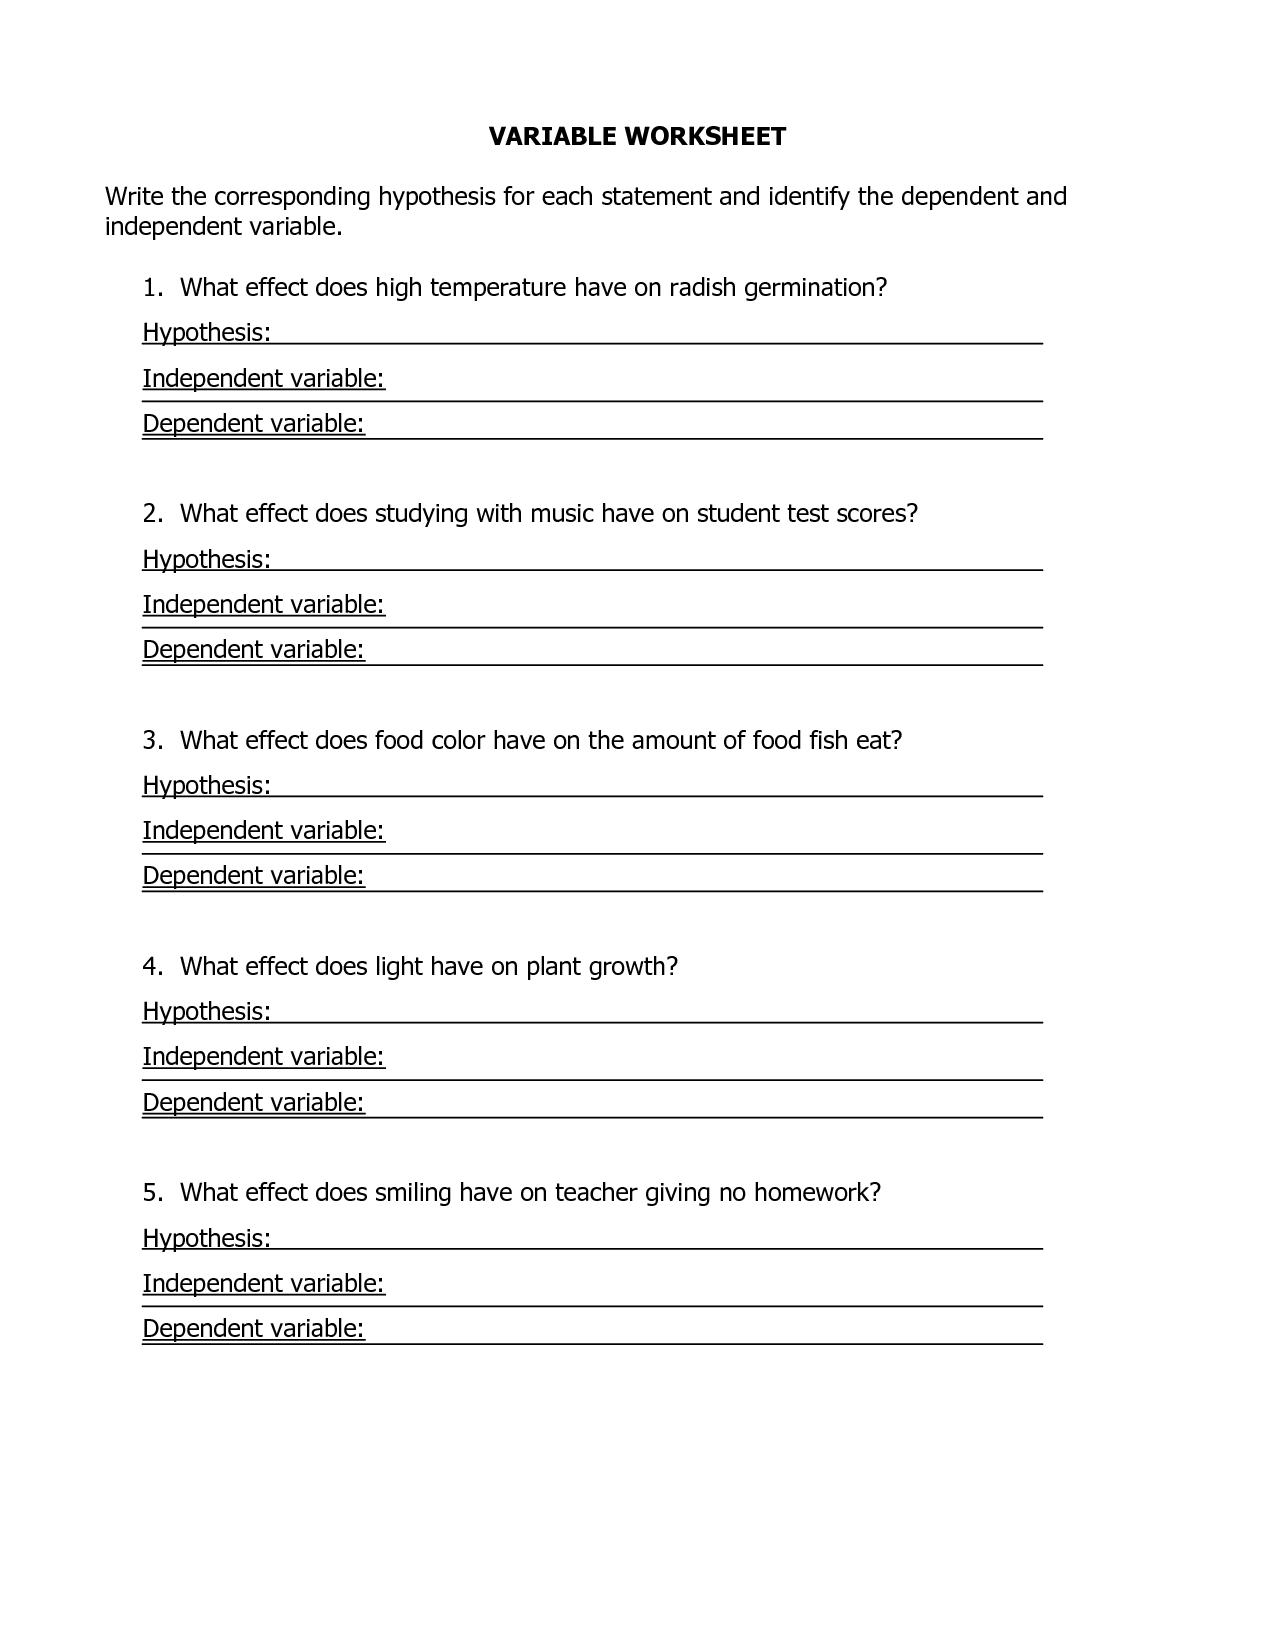 15-best-images-of-simpsons-variable-worksheet-answer-key-writing